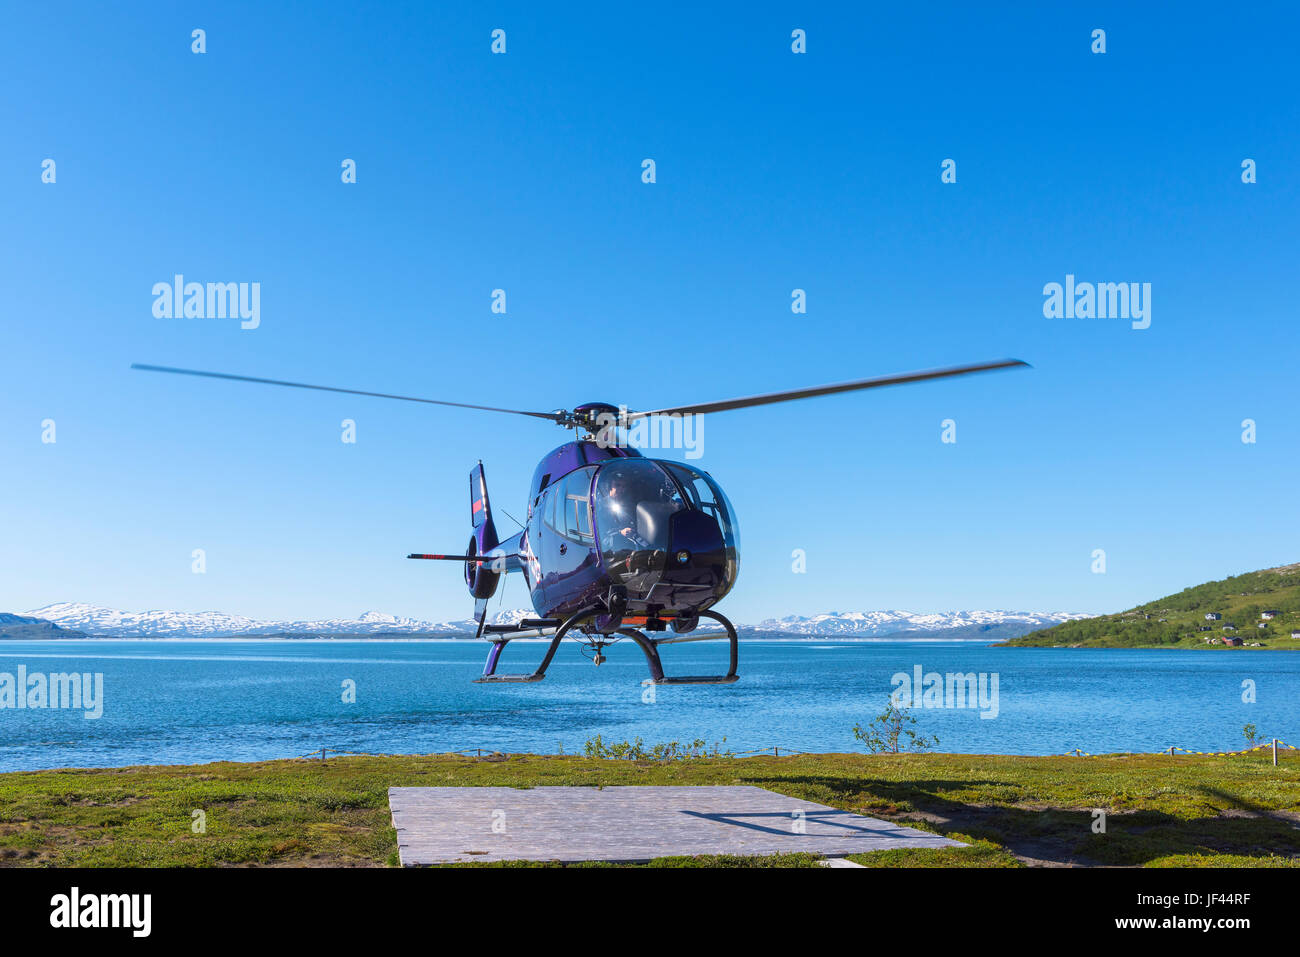 Helicopter in air Stock Photo